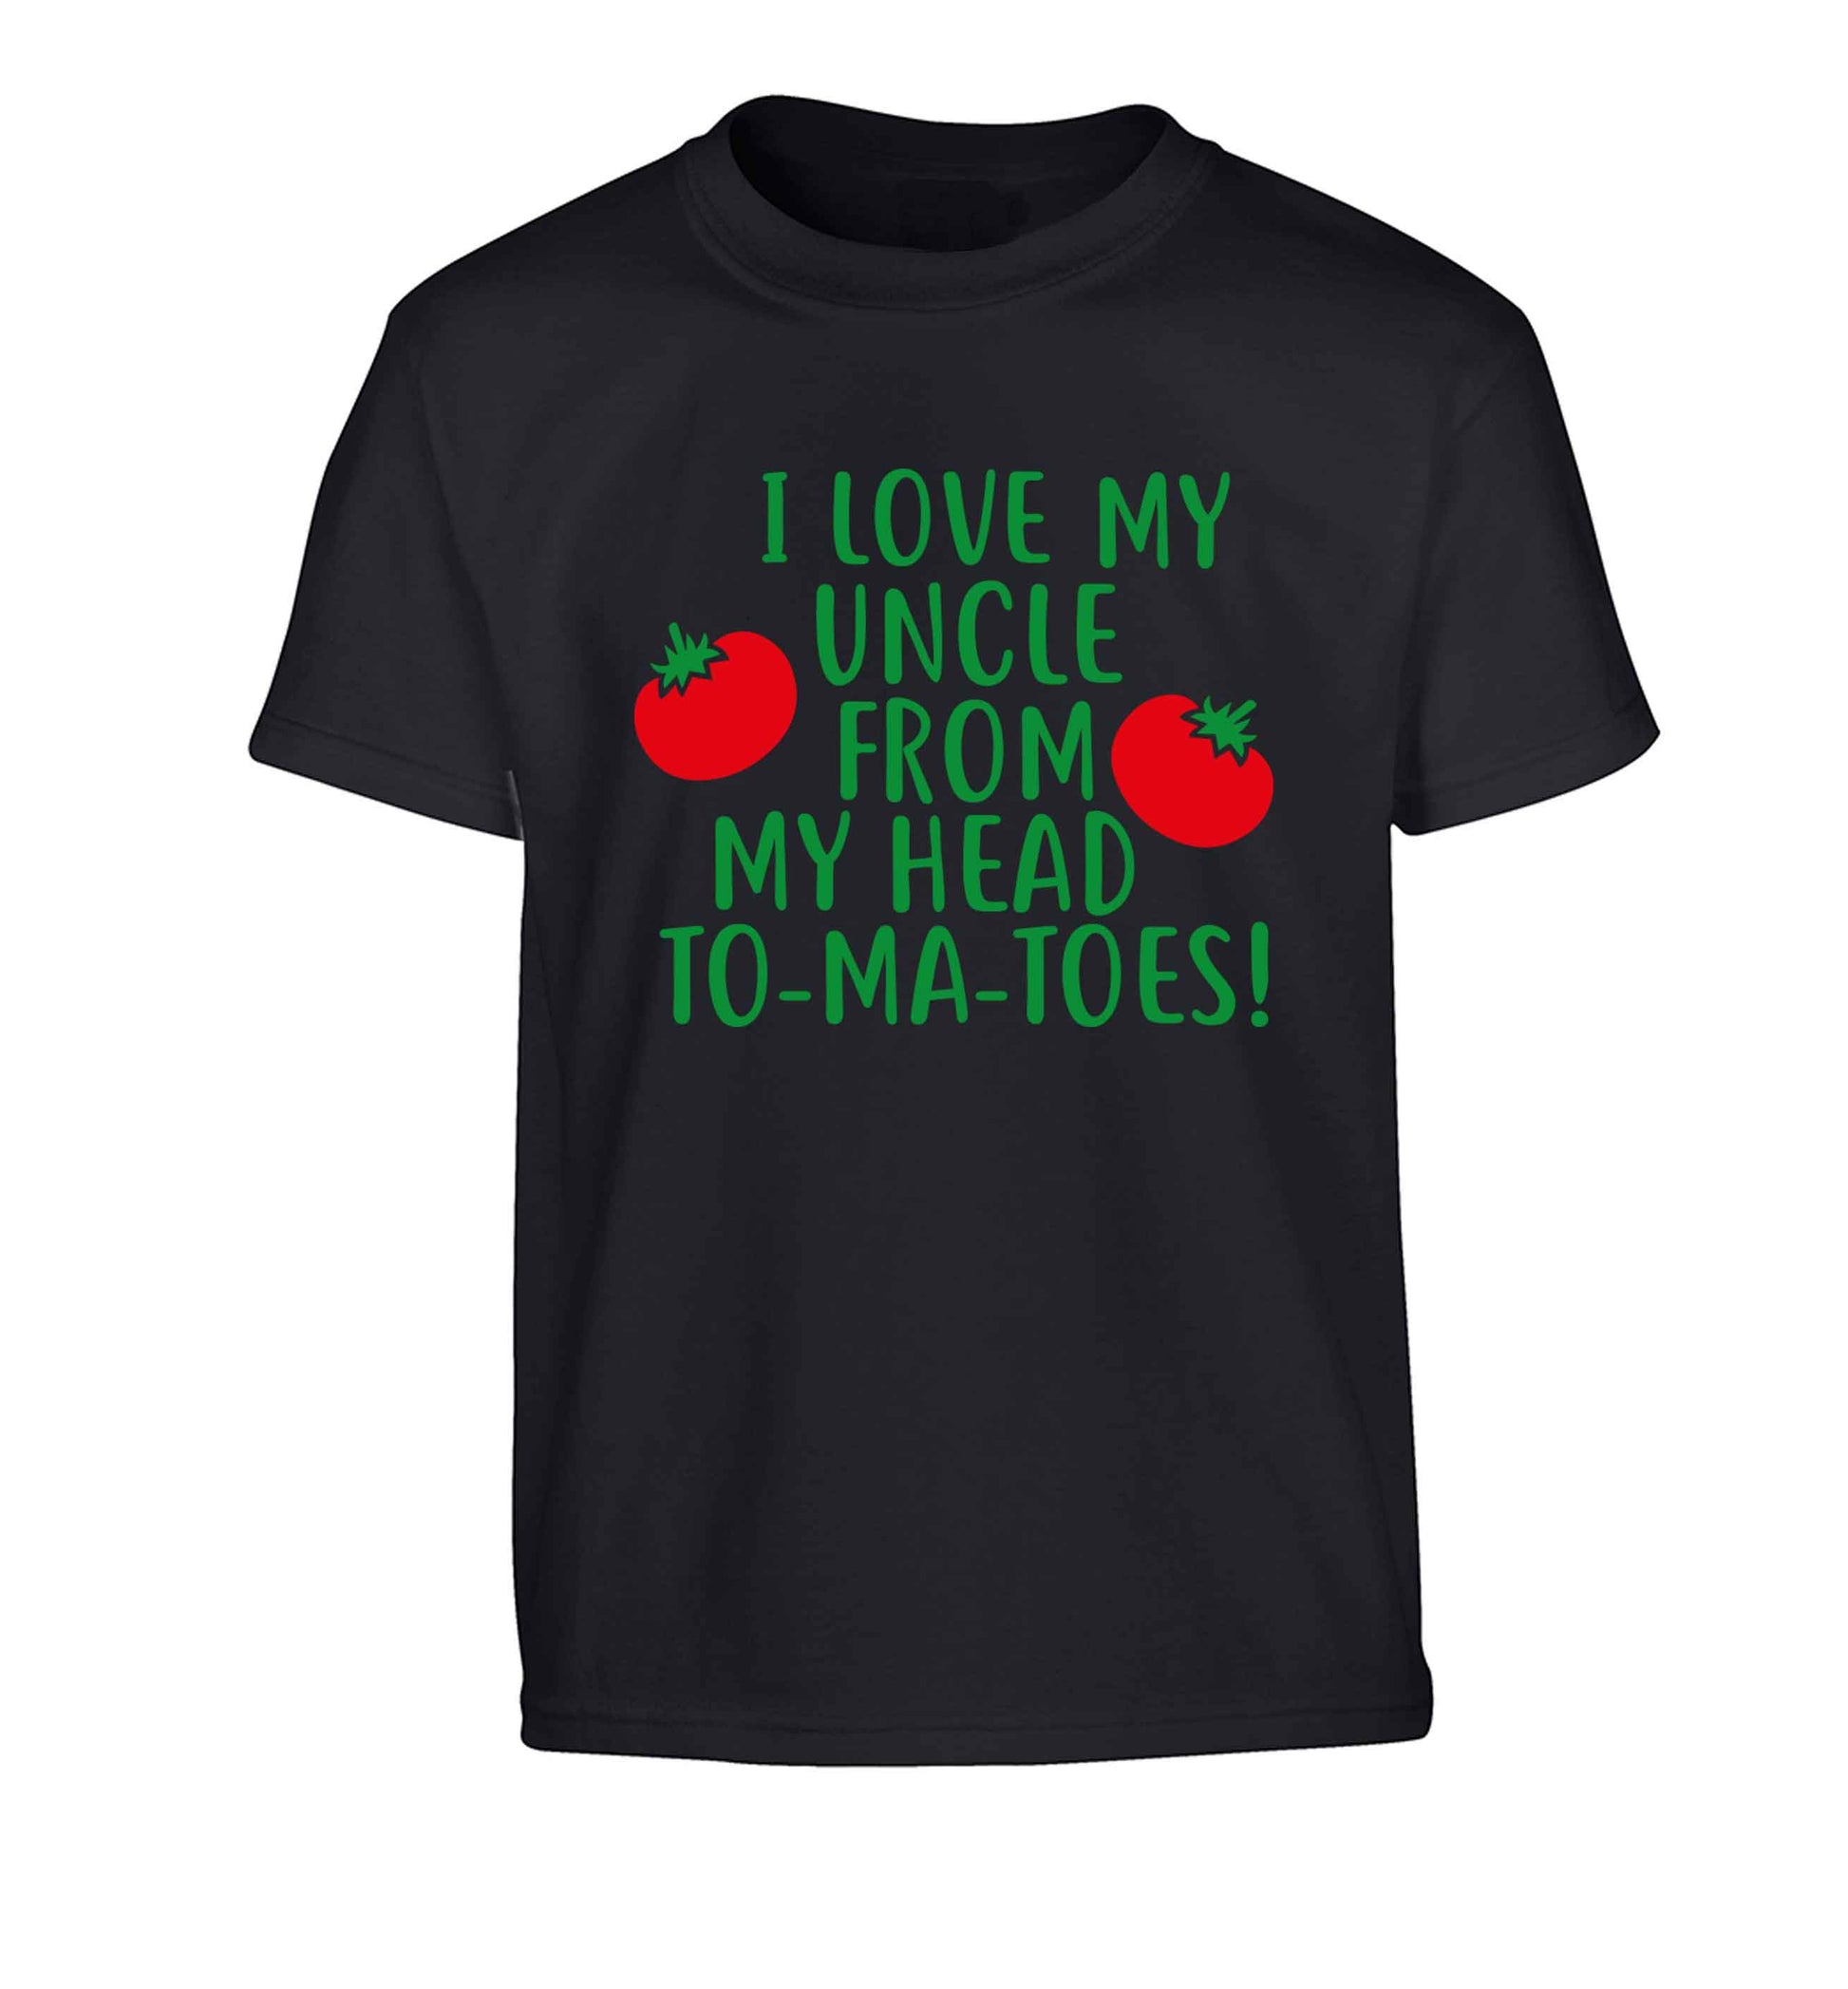 I love my uncle from my head To-Ma-Toes Children's black Tshirt 12-13 Years